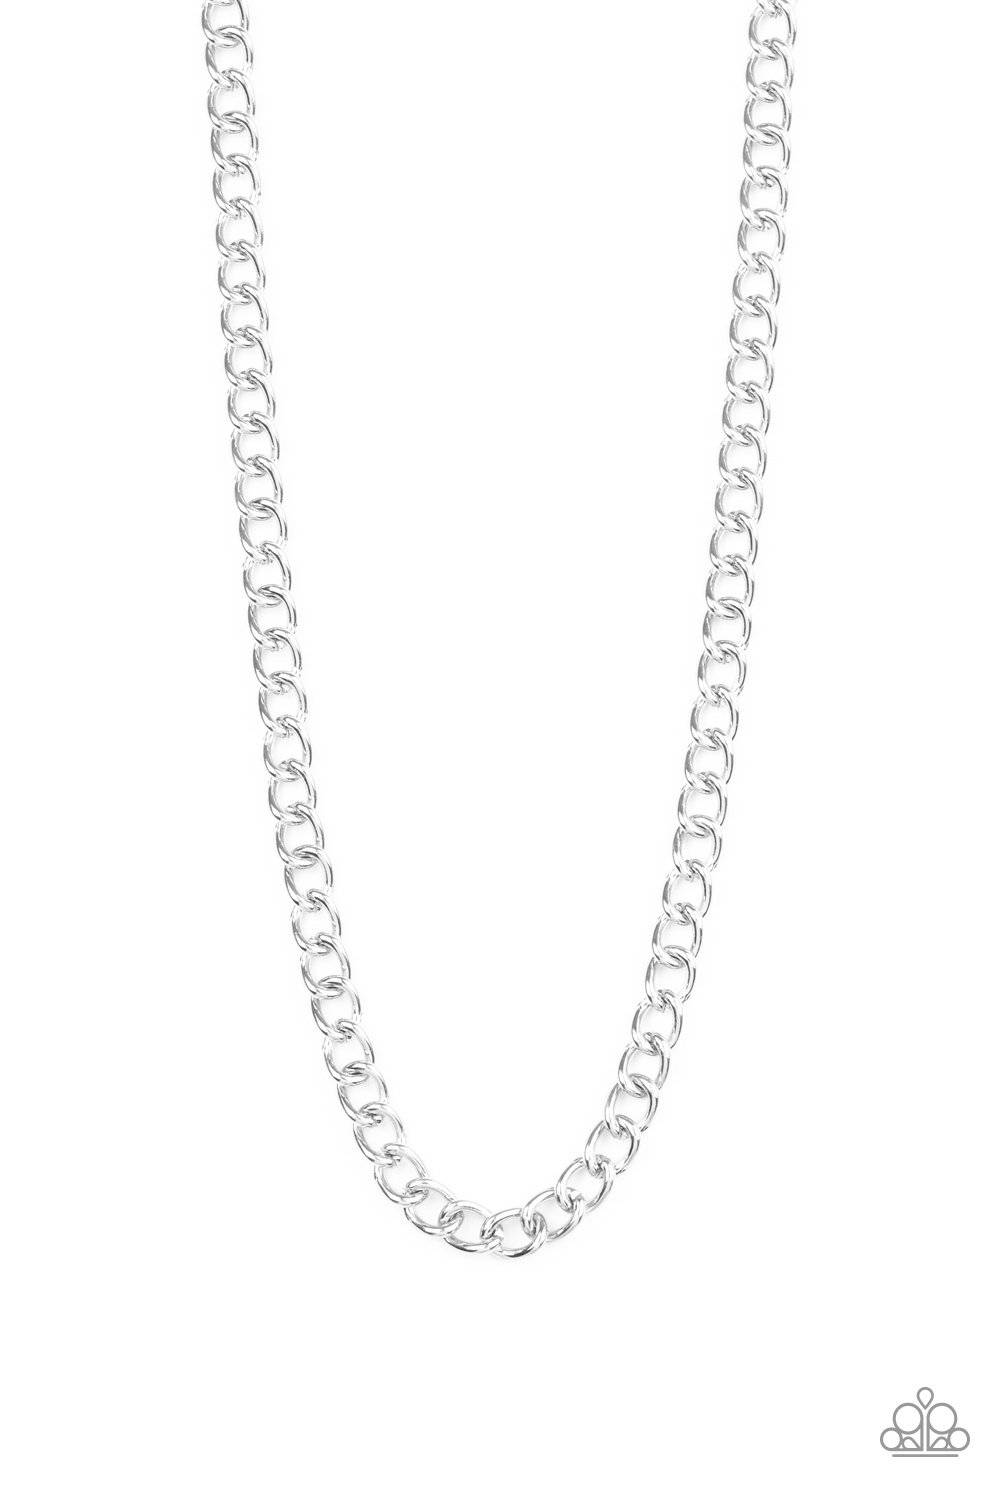 A102 - Full Court, Men's Paparazzi Silver Necklace by Paparazzi Accessories on Fancy5Fashion.com